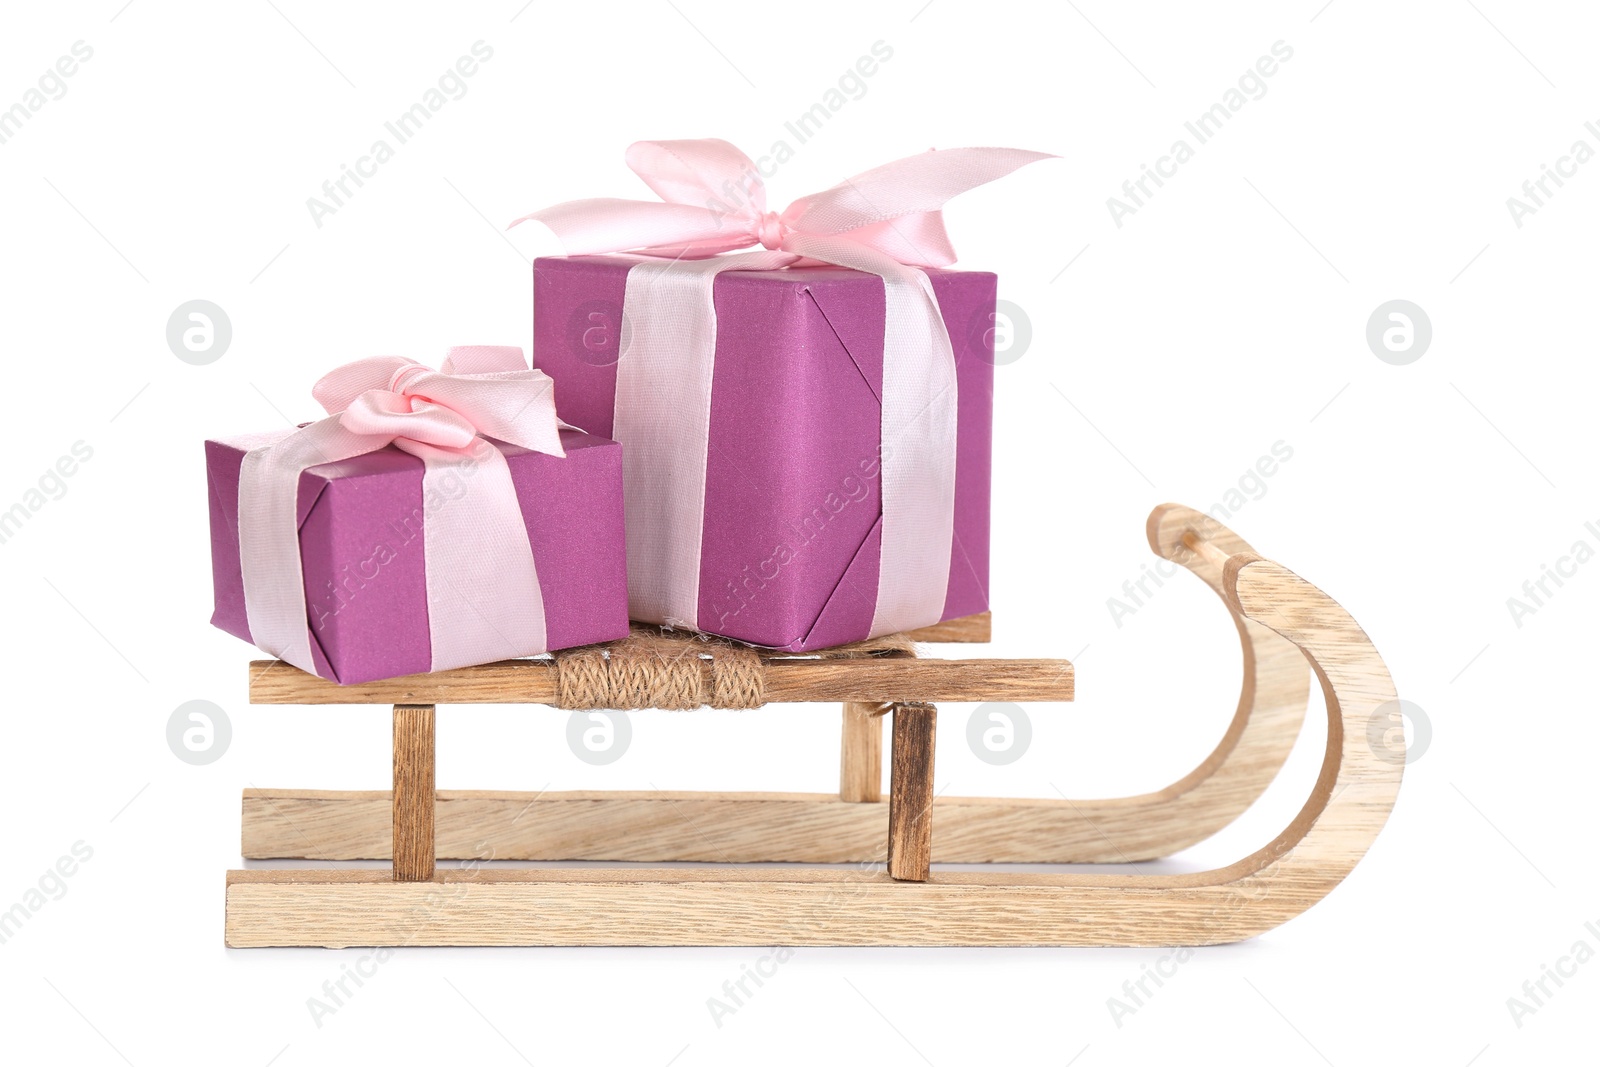 Photo of Wooden sleigh with presents on white background. Christmas holiday decor